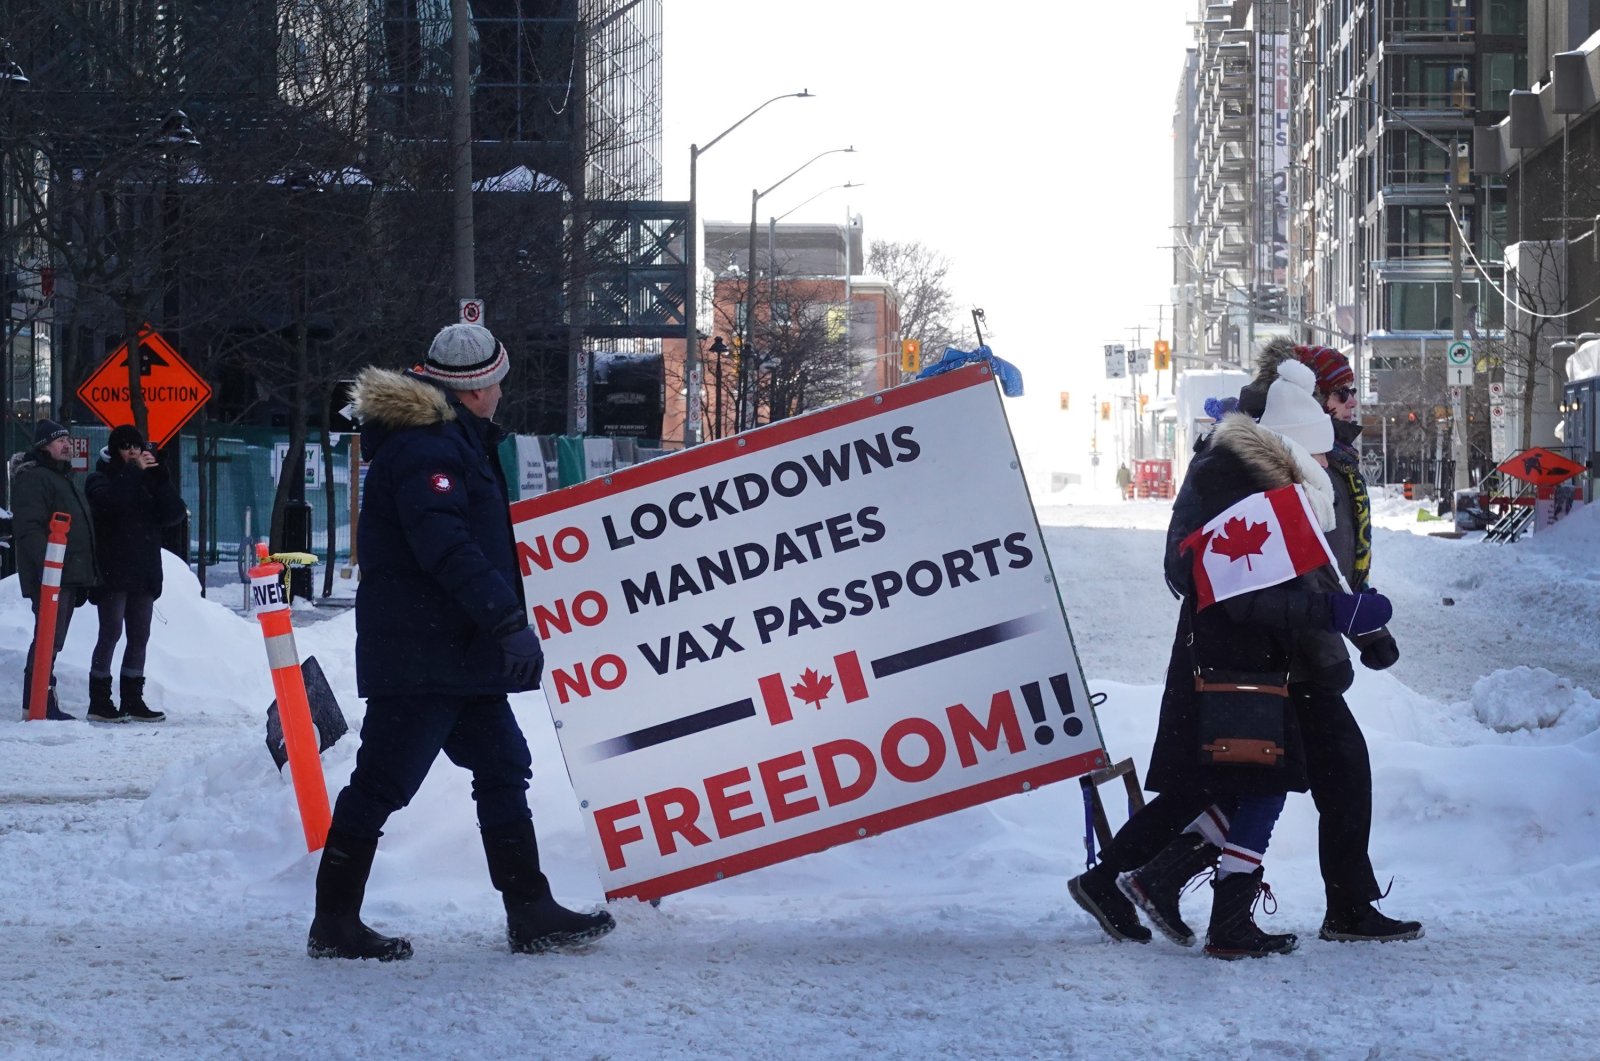 People walk toward Parliament Hill where earlier in the day police moved in and ended a demonstration organized by truck drivers opposing vaccine mandates that had been entrenched for the past 23 days in Ottawa, Ontario, Canada, Feb. 19, 2022. (AFP Photo)